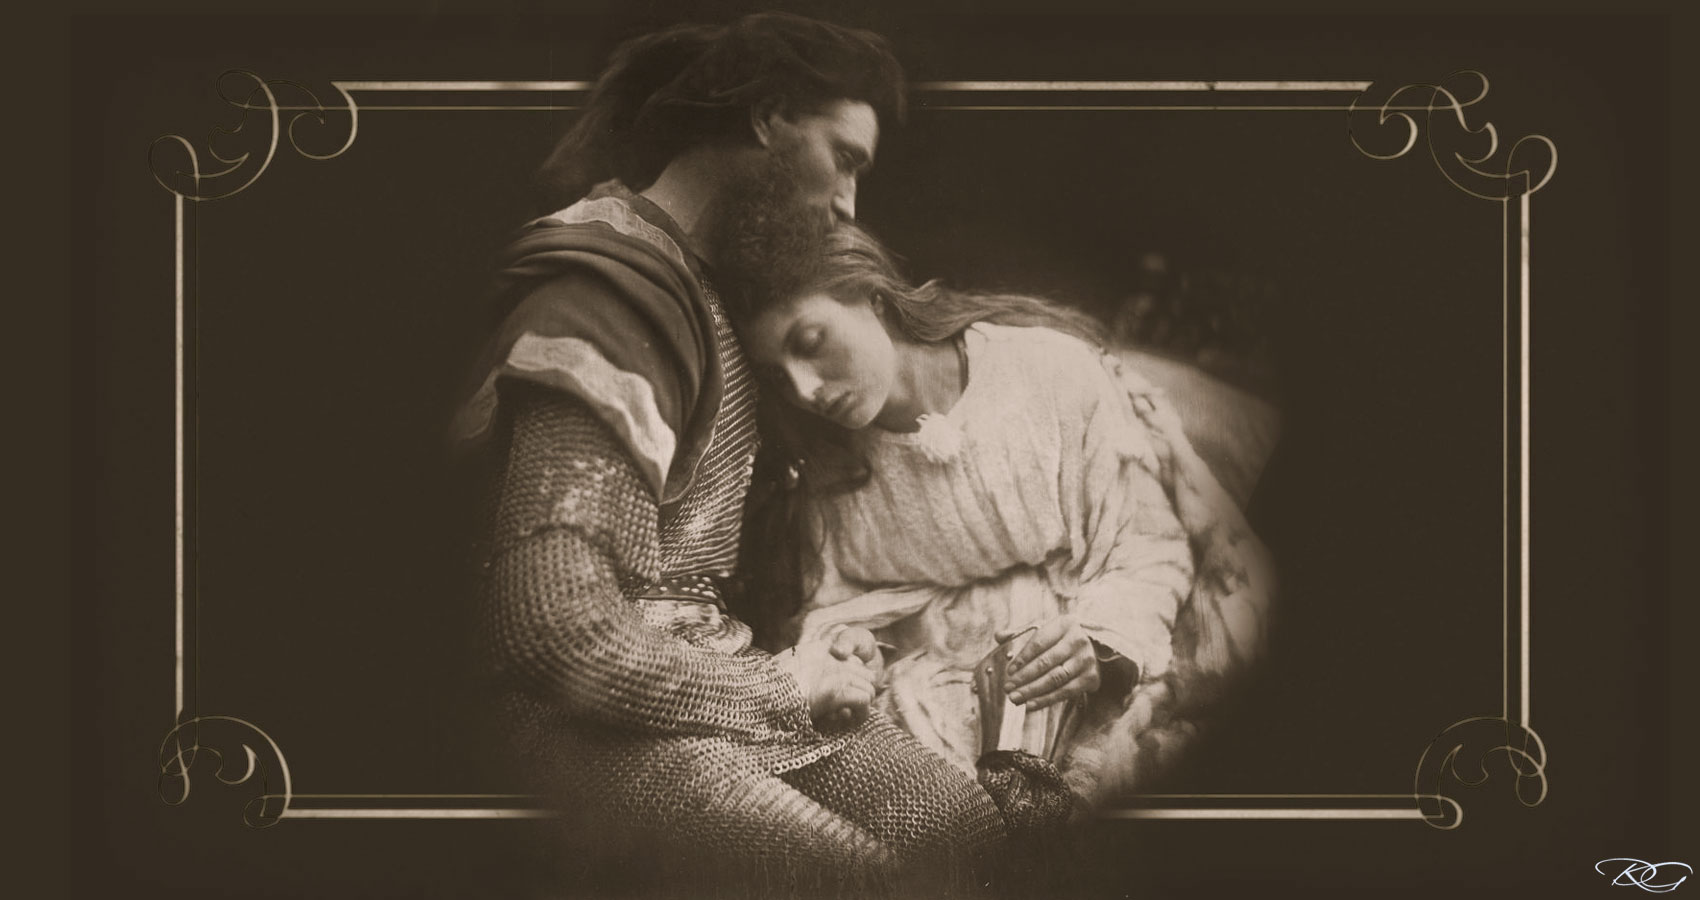 Lancelot's Lament, poetry written by LadyLily at Spillwords.com